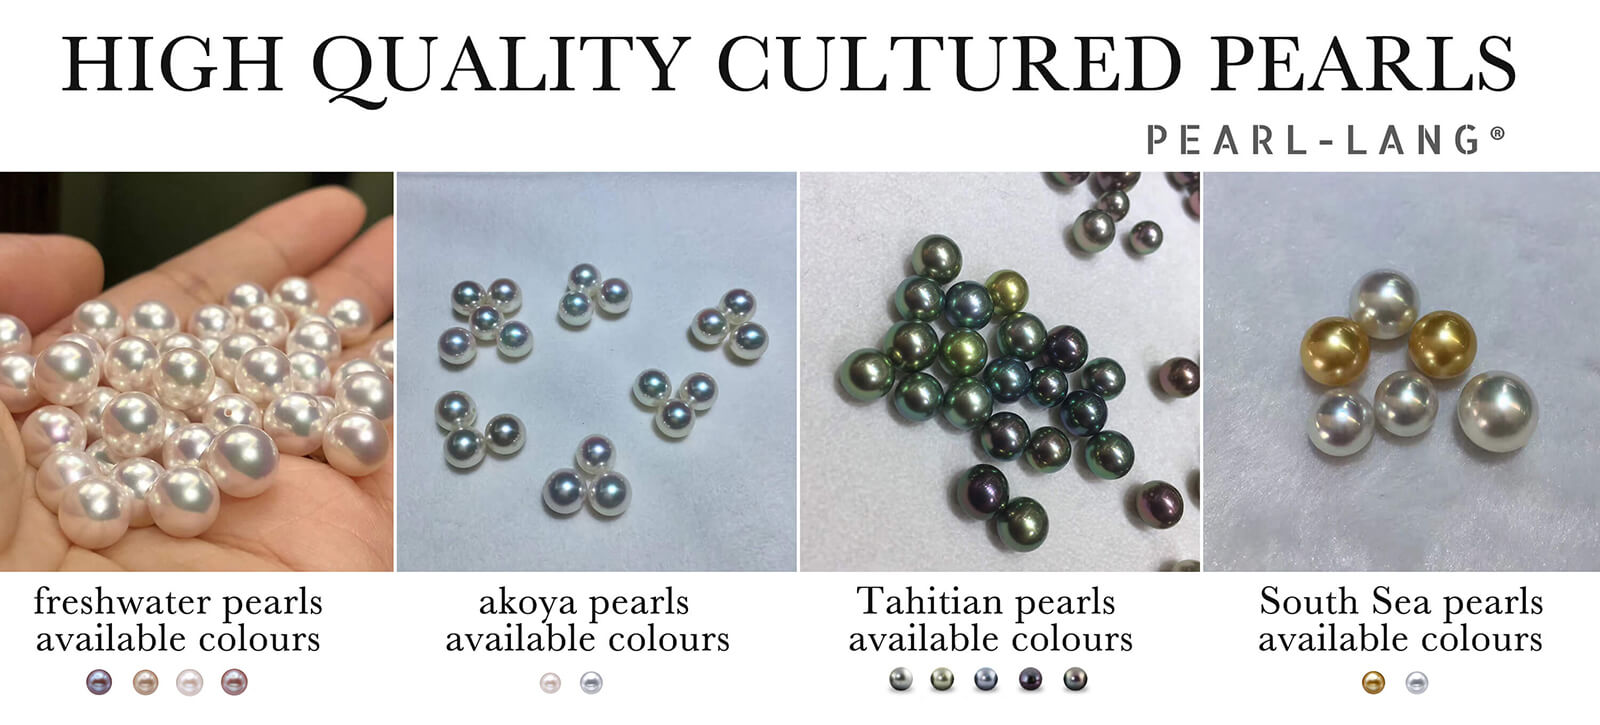 High Quality Cultured Pearls